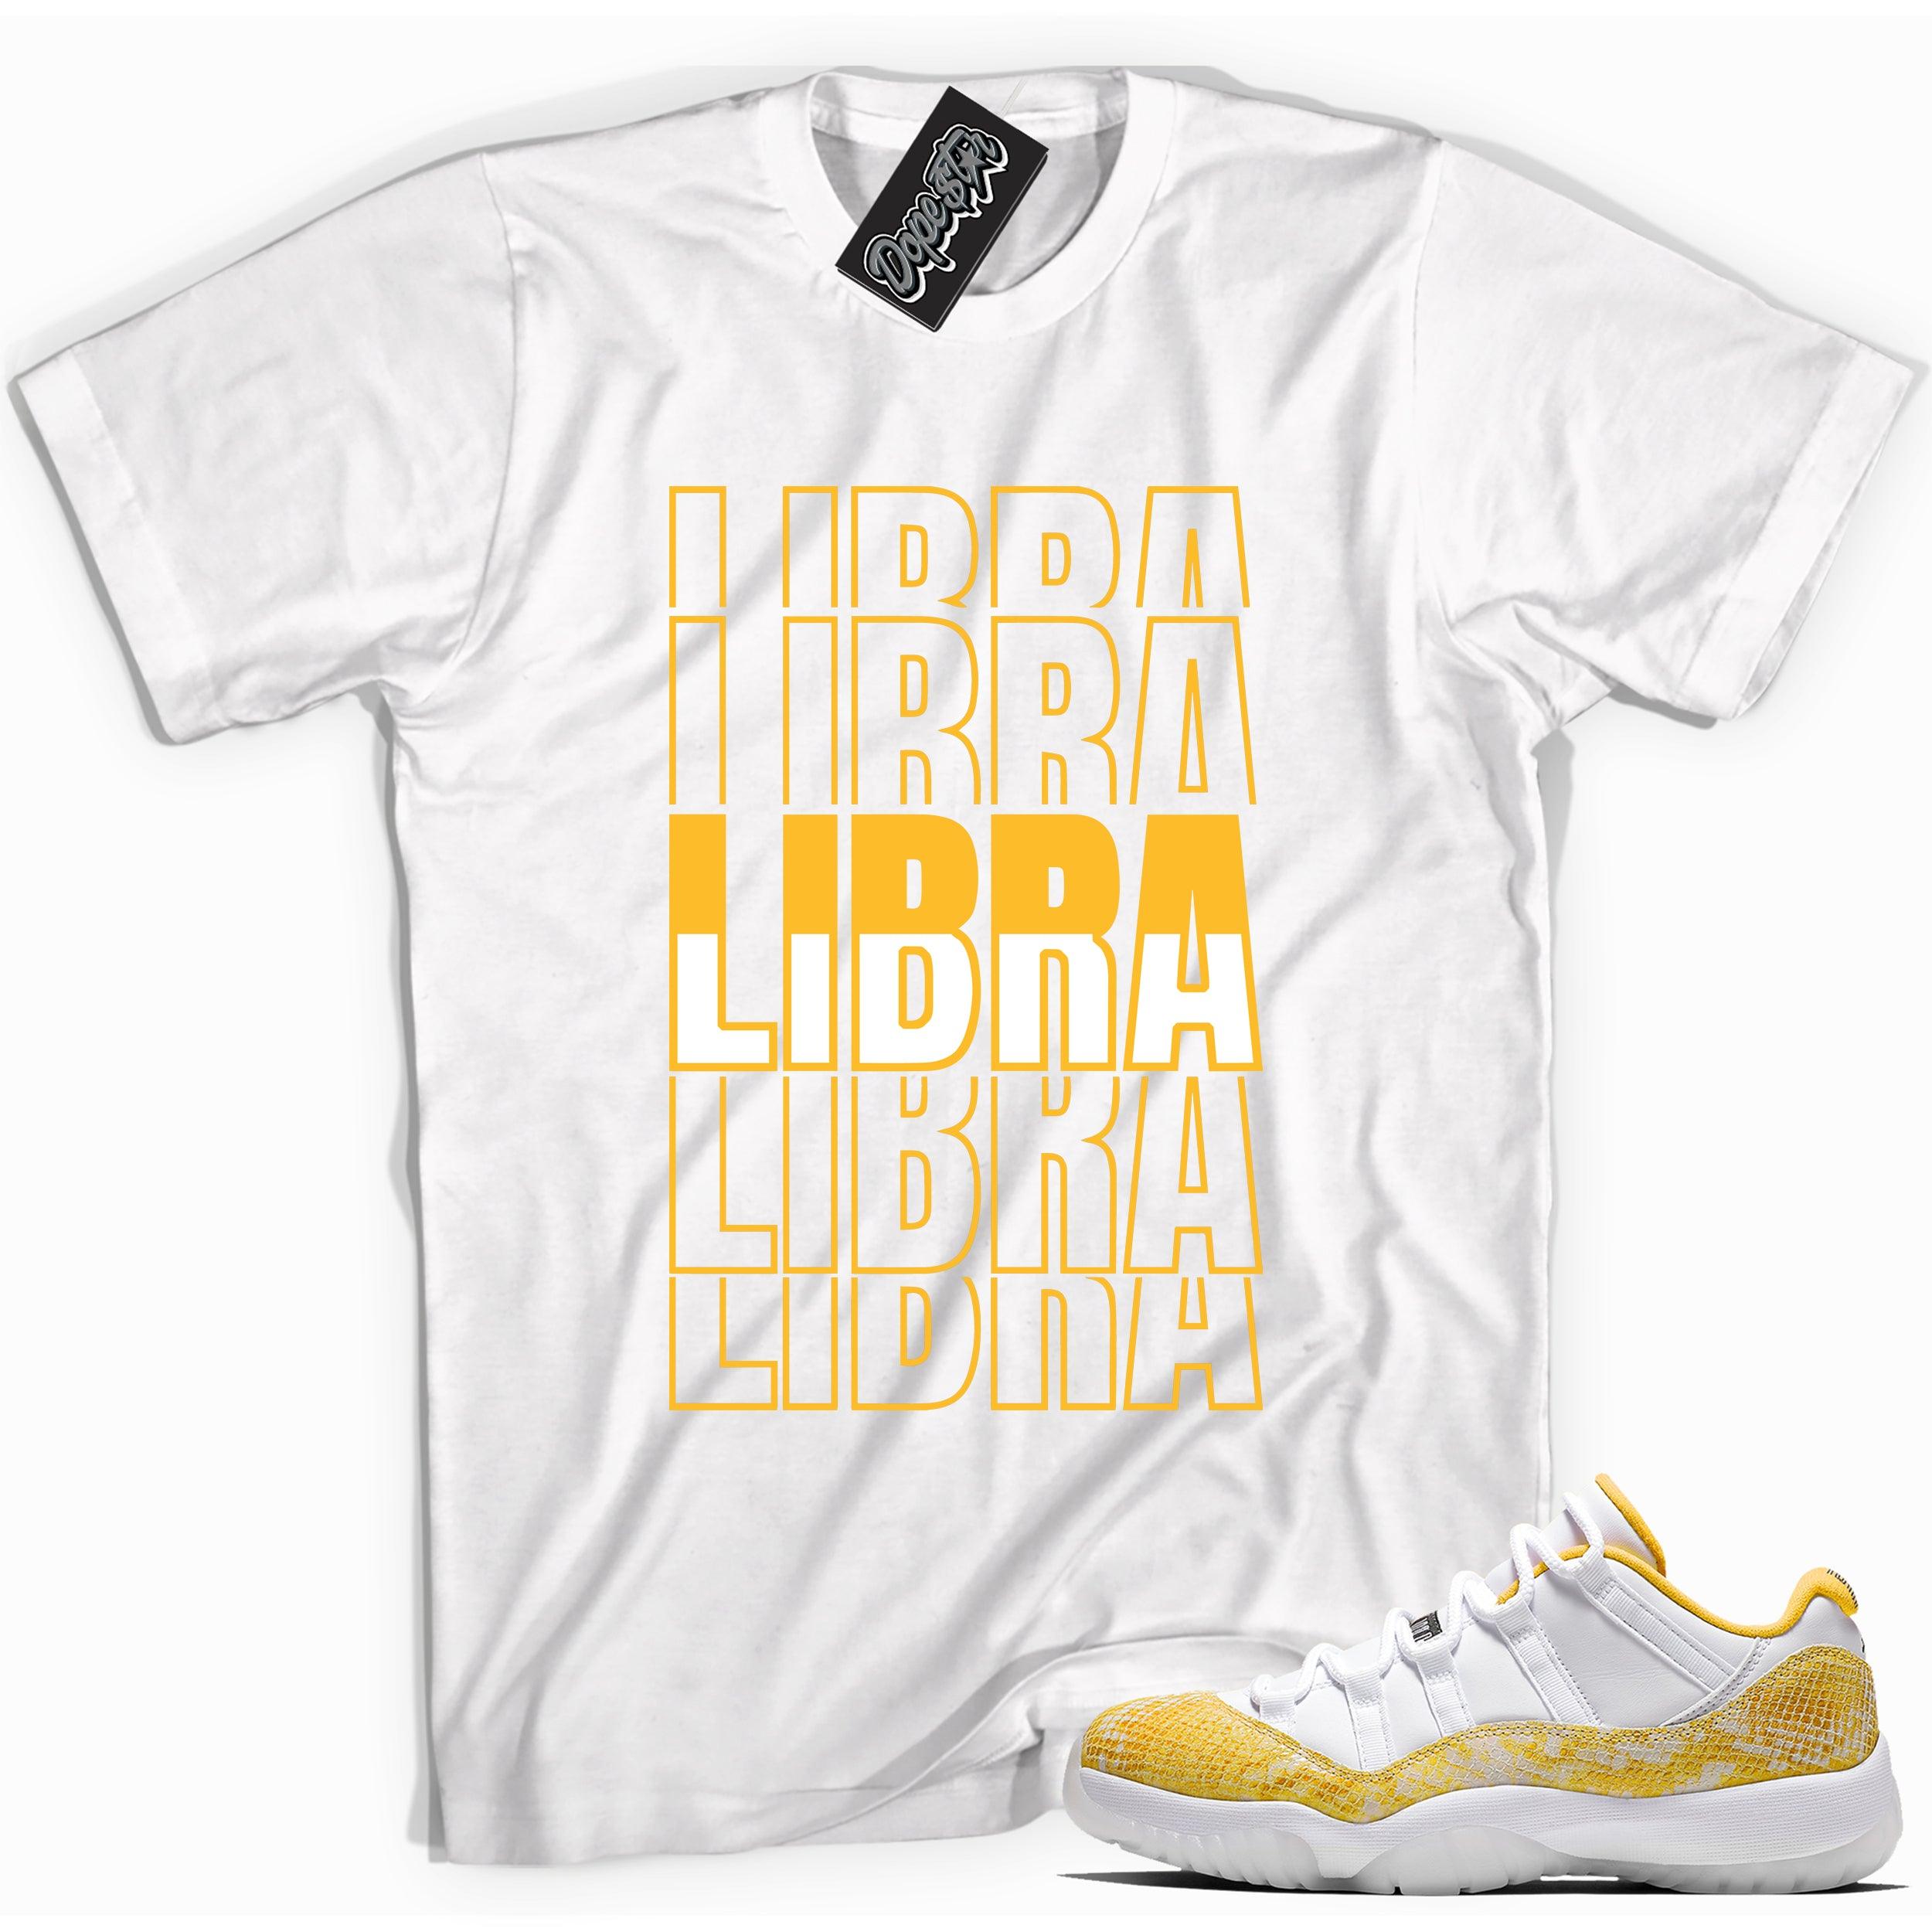 Cool white graphic tee with 'libra' print, that perfectly matches Air Jordan 11 Retro Low Yellow Snakeskin sneakers